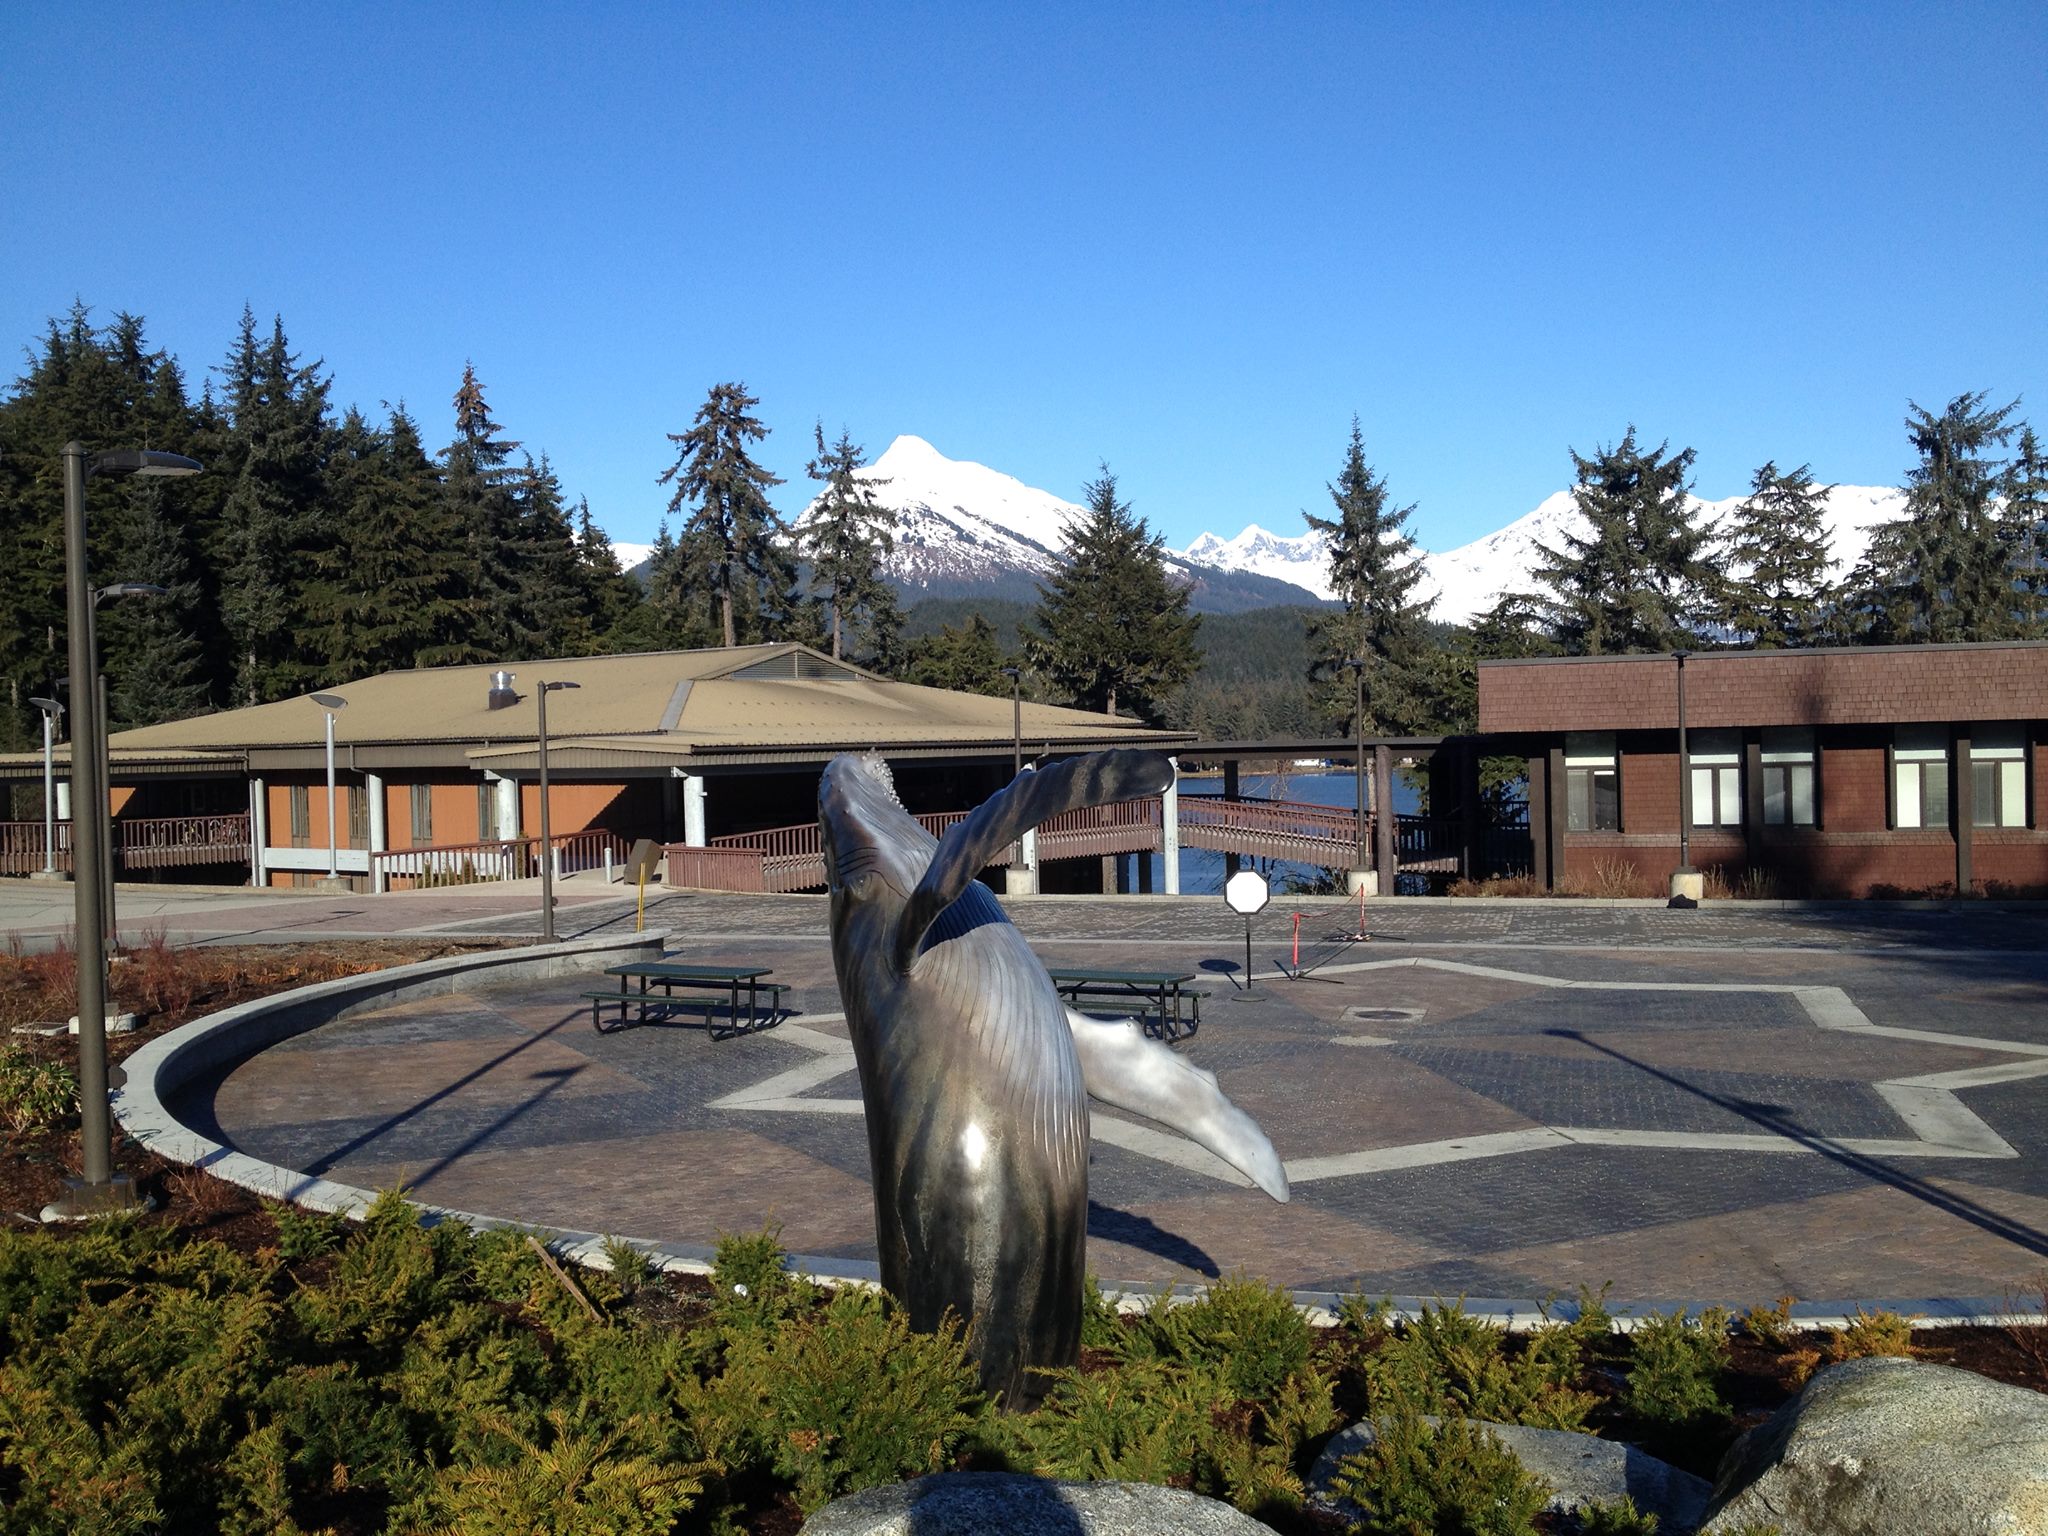 UAS campus sunny day with breaching whale statue, snow-topped mountains in background